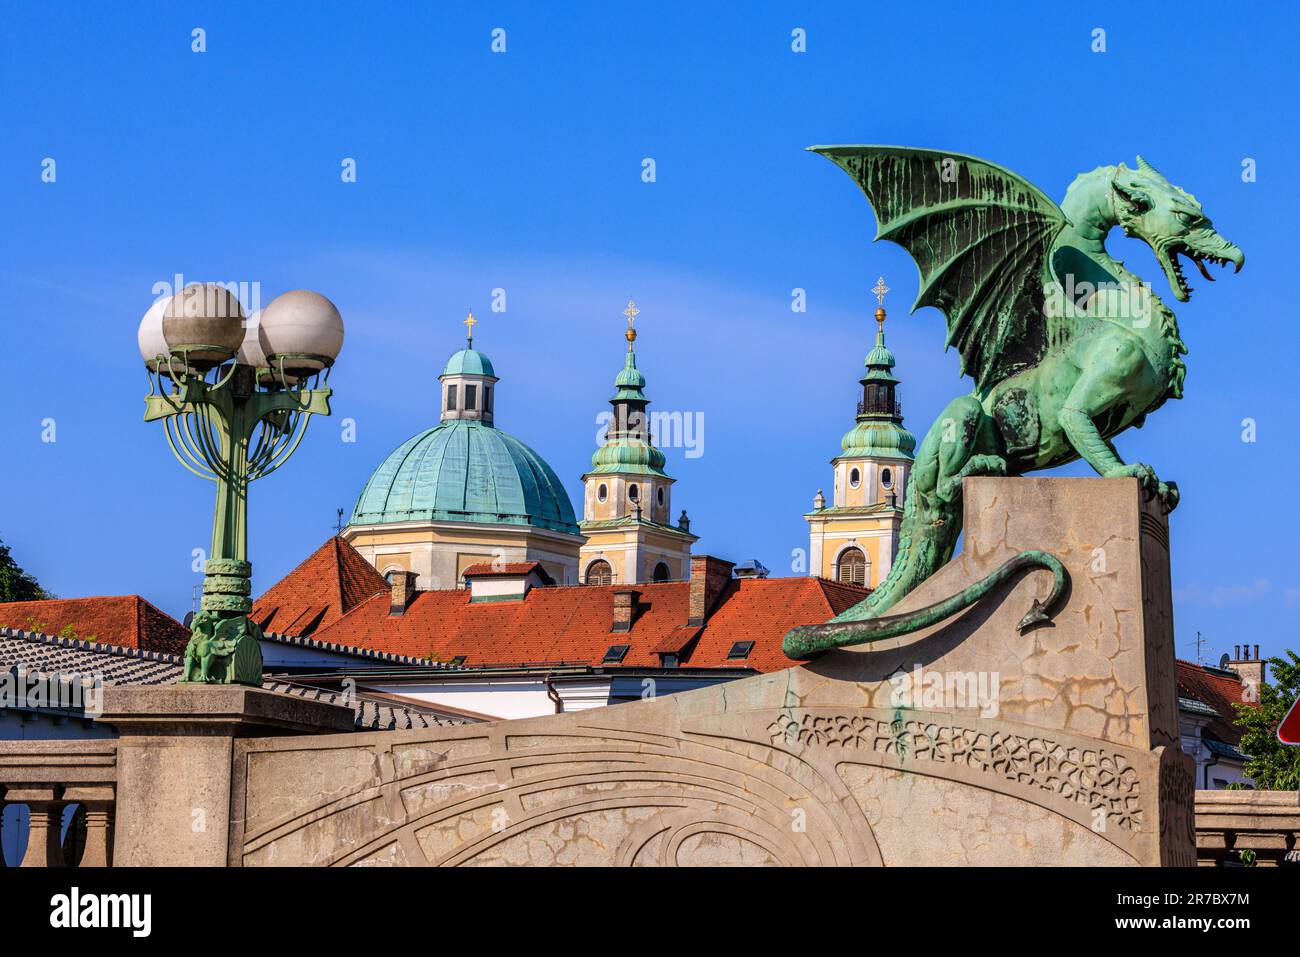 the green statue of the dragon bridge of ljubljana and the green domes of st nicholas cathedral Stock Photo